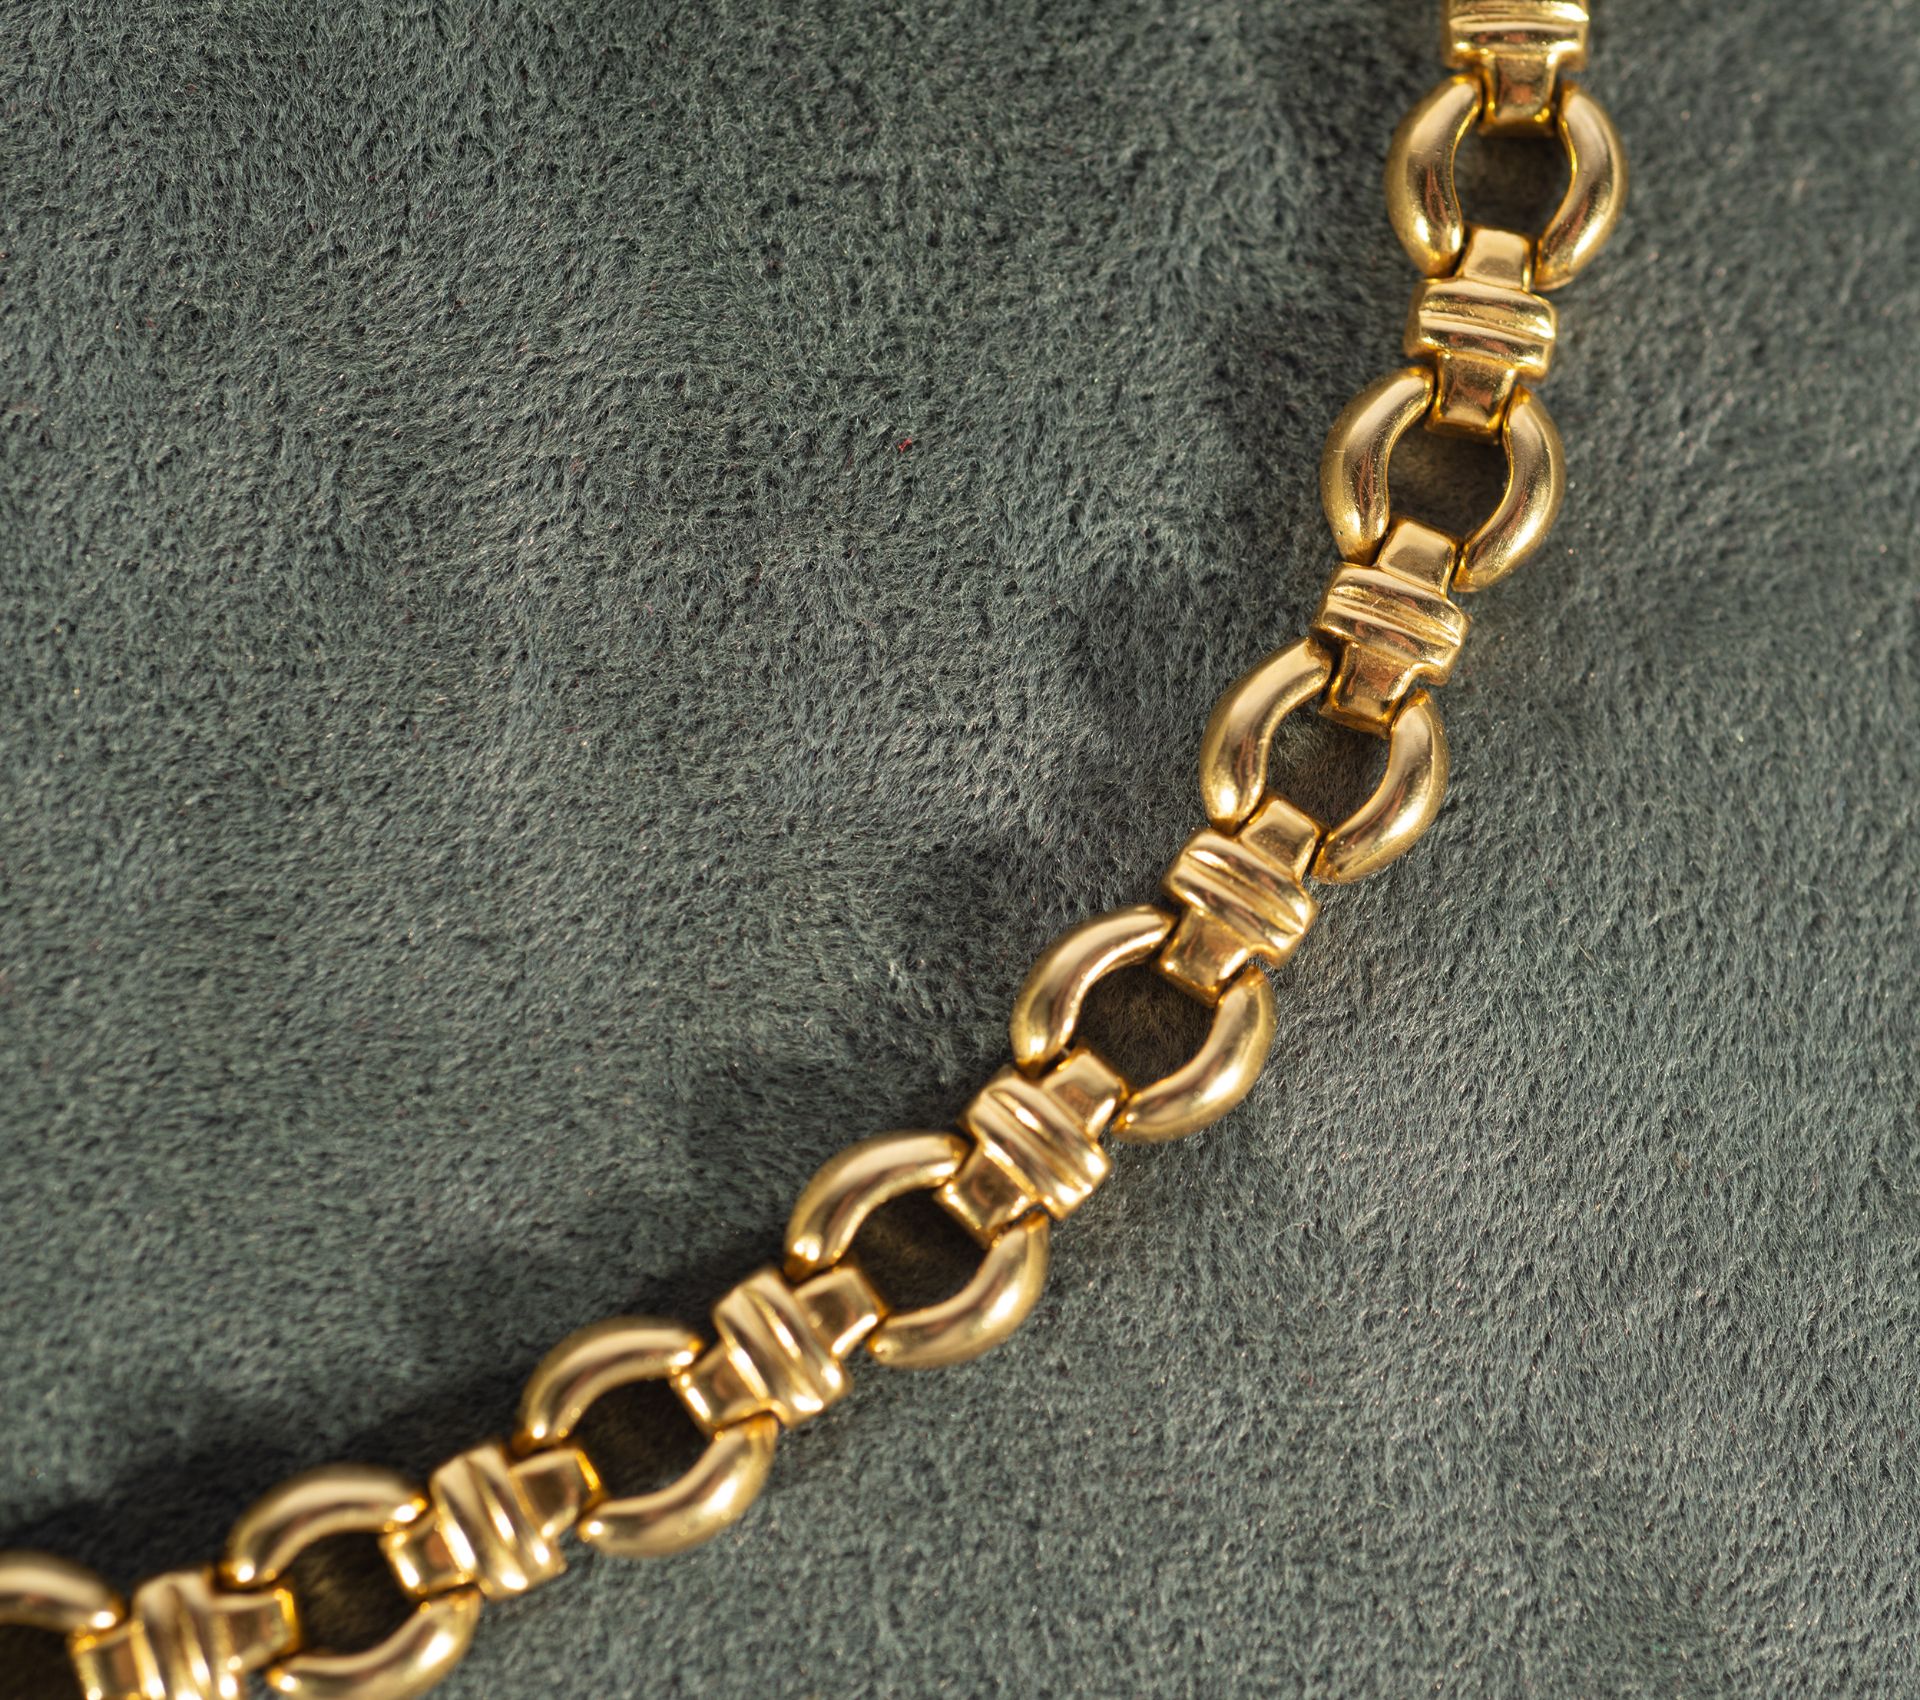 Lady necklace in solid gold, 1990s - Image 3 of 5